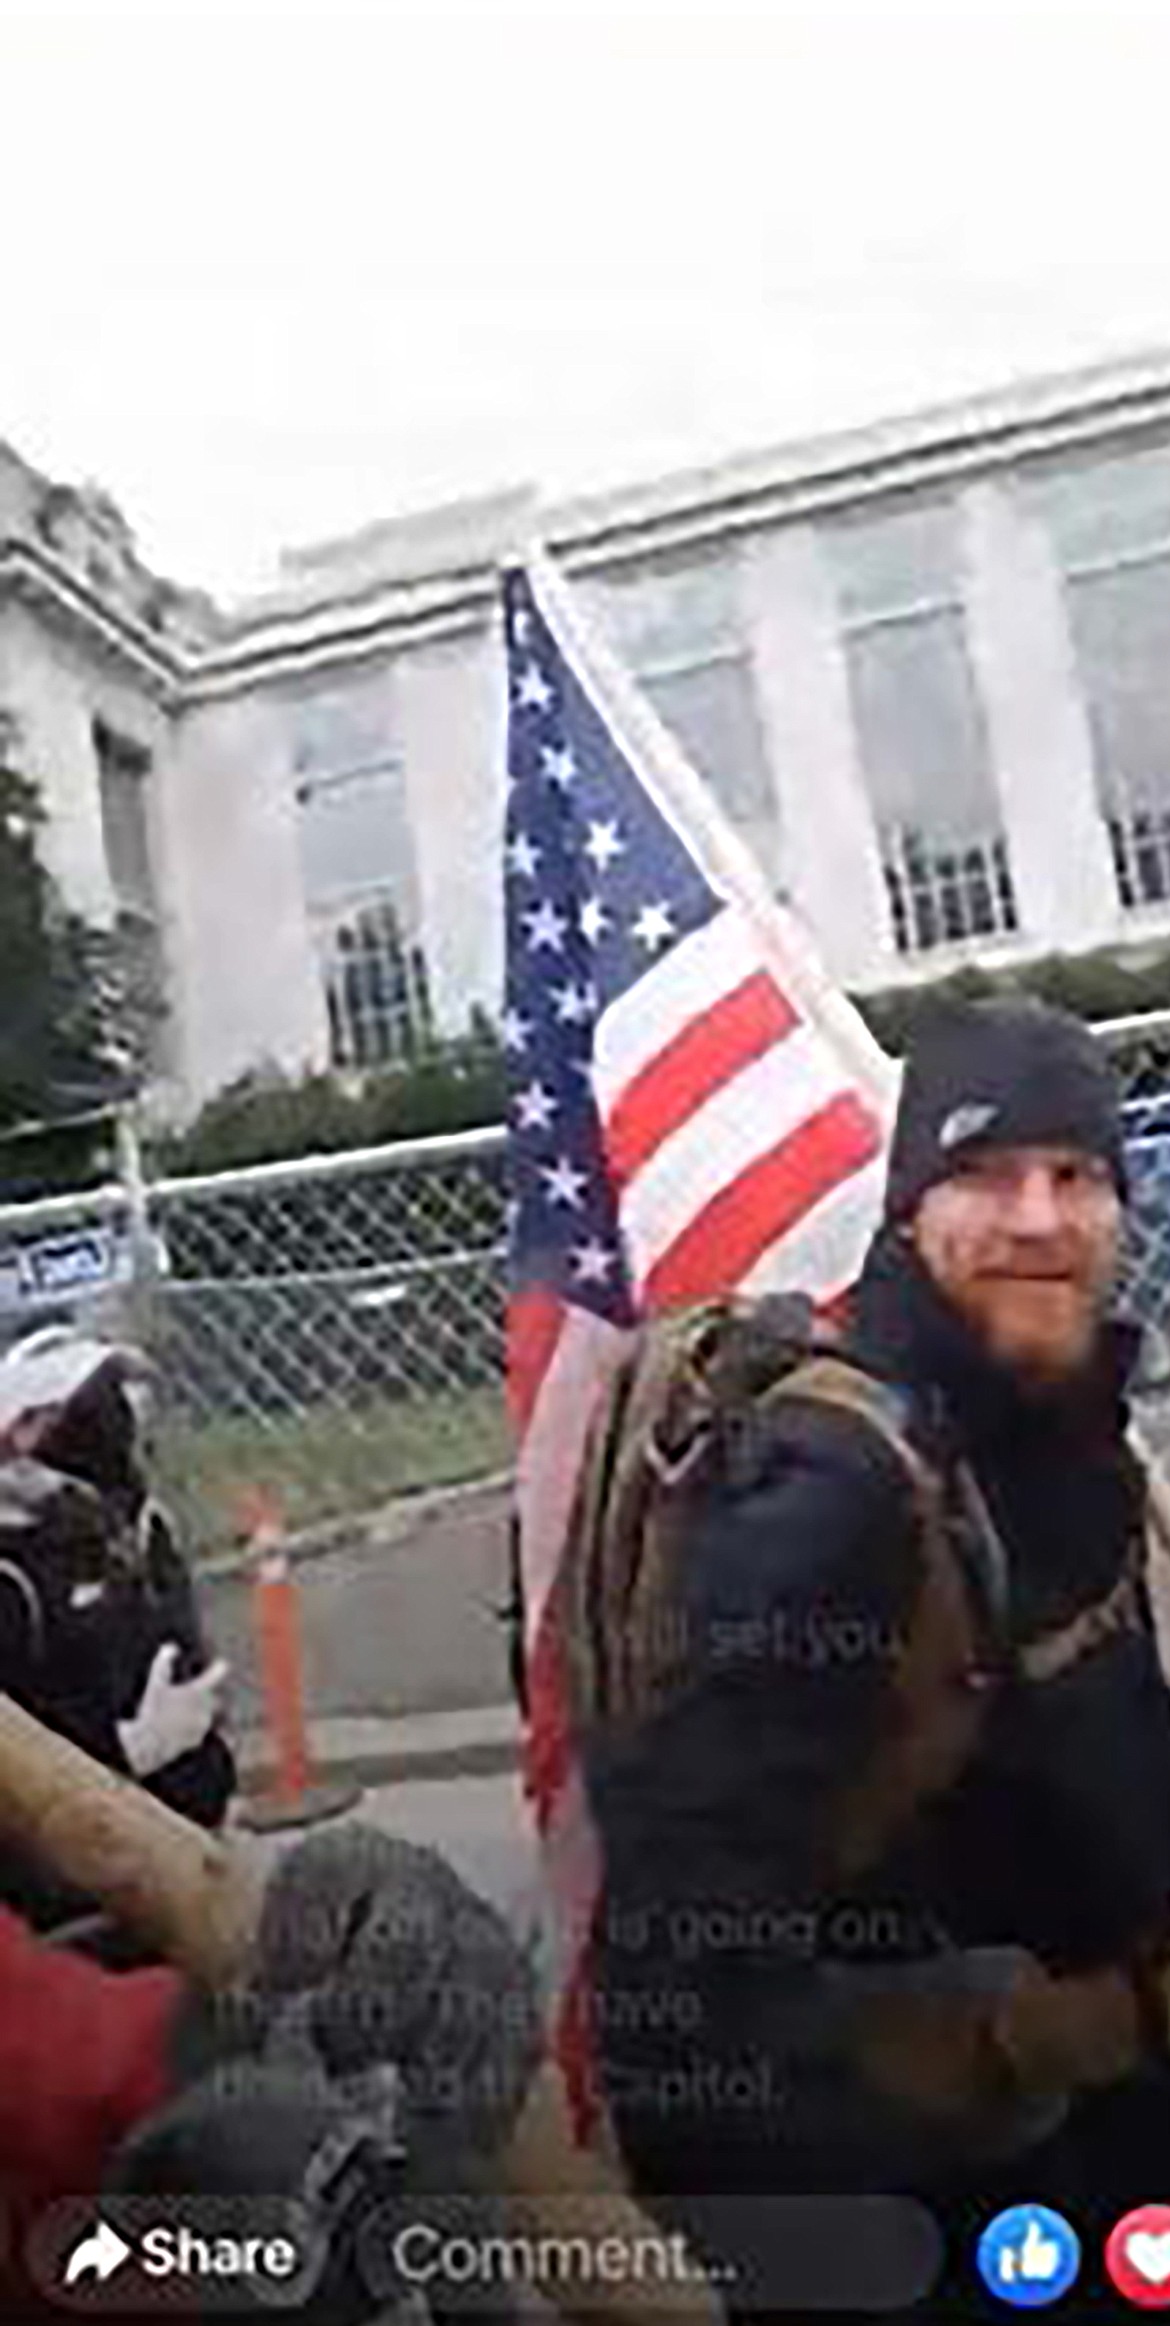 A screenshot appears to show Michael Anthony Pope of Sandpoint at the Jan. 6 march to the Capitol building.